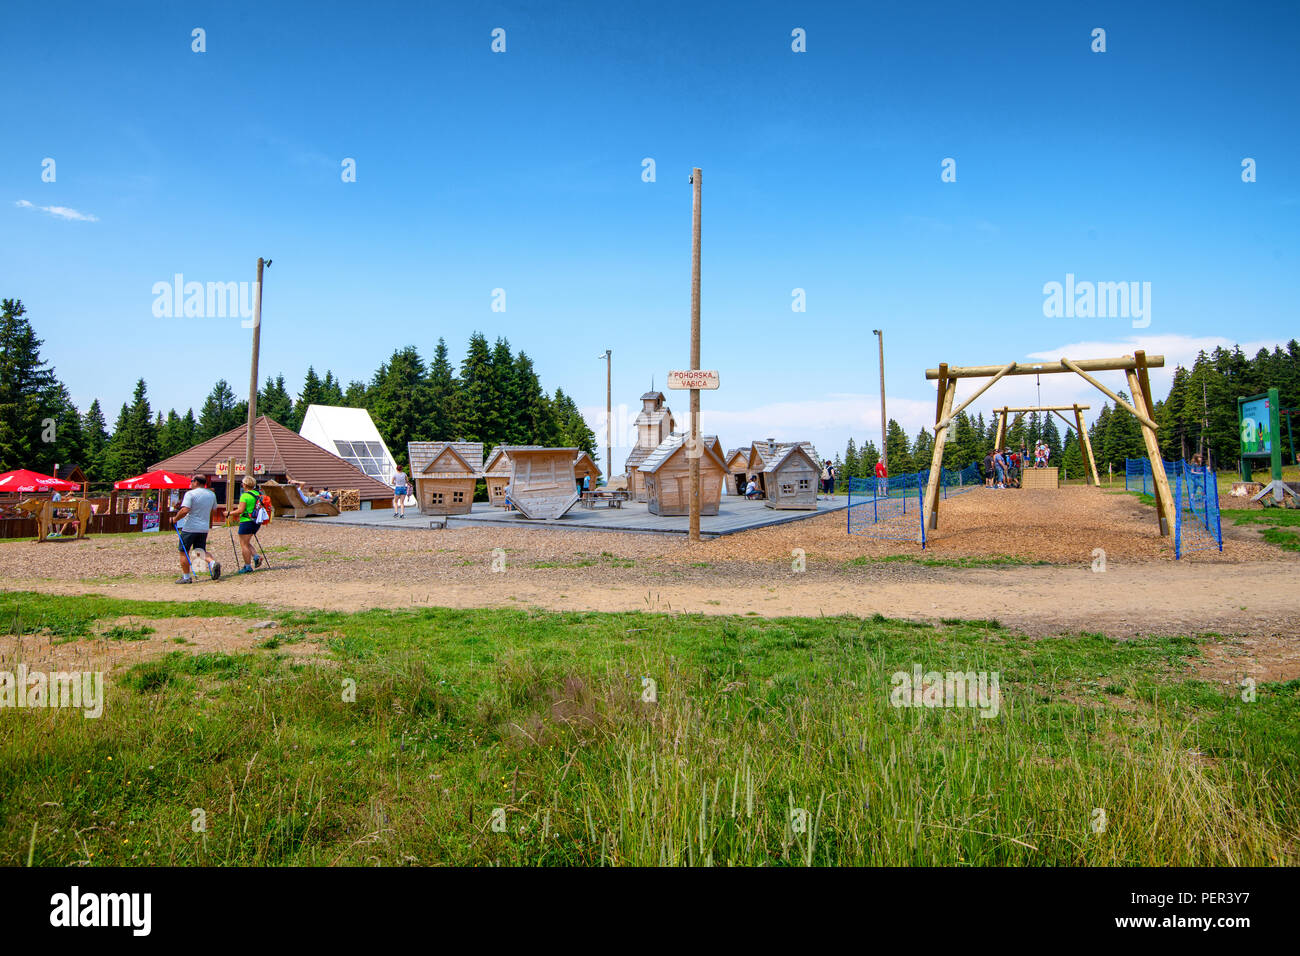 Rogla summer mountain resort is popular with hikers and families as it offers activities for all generations Stock Photo